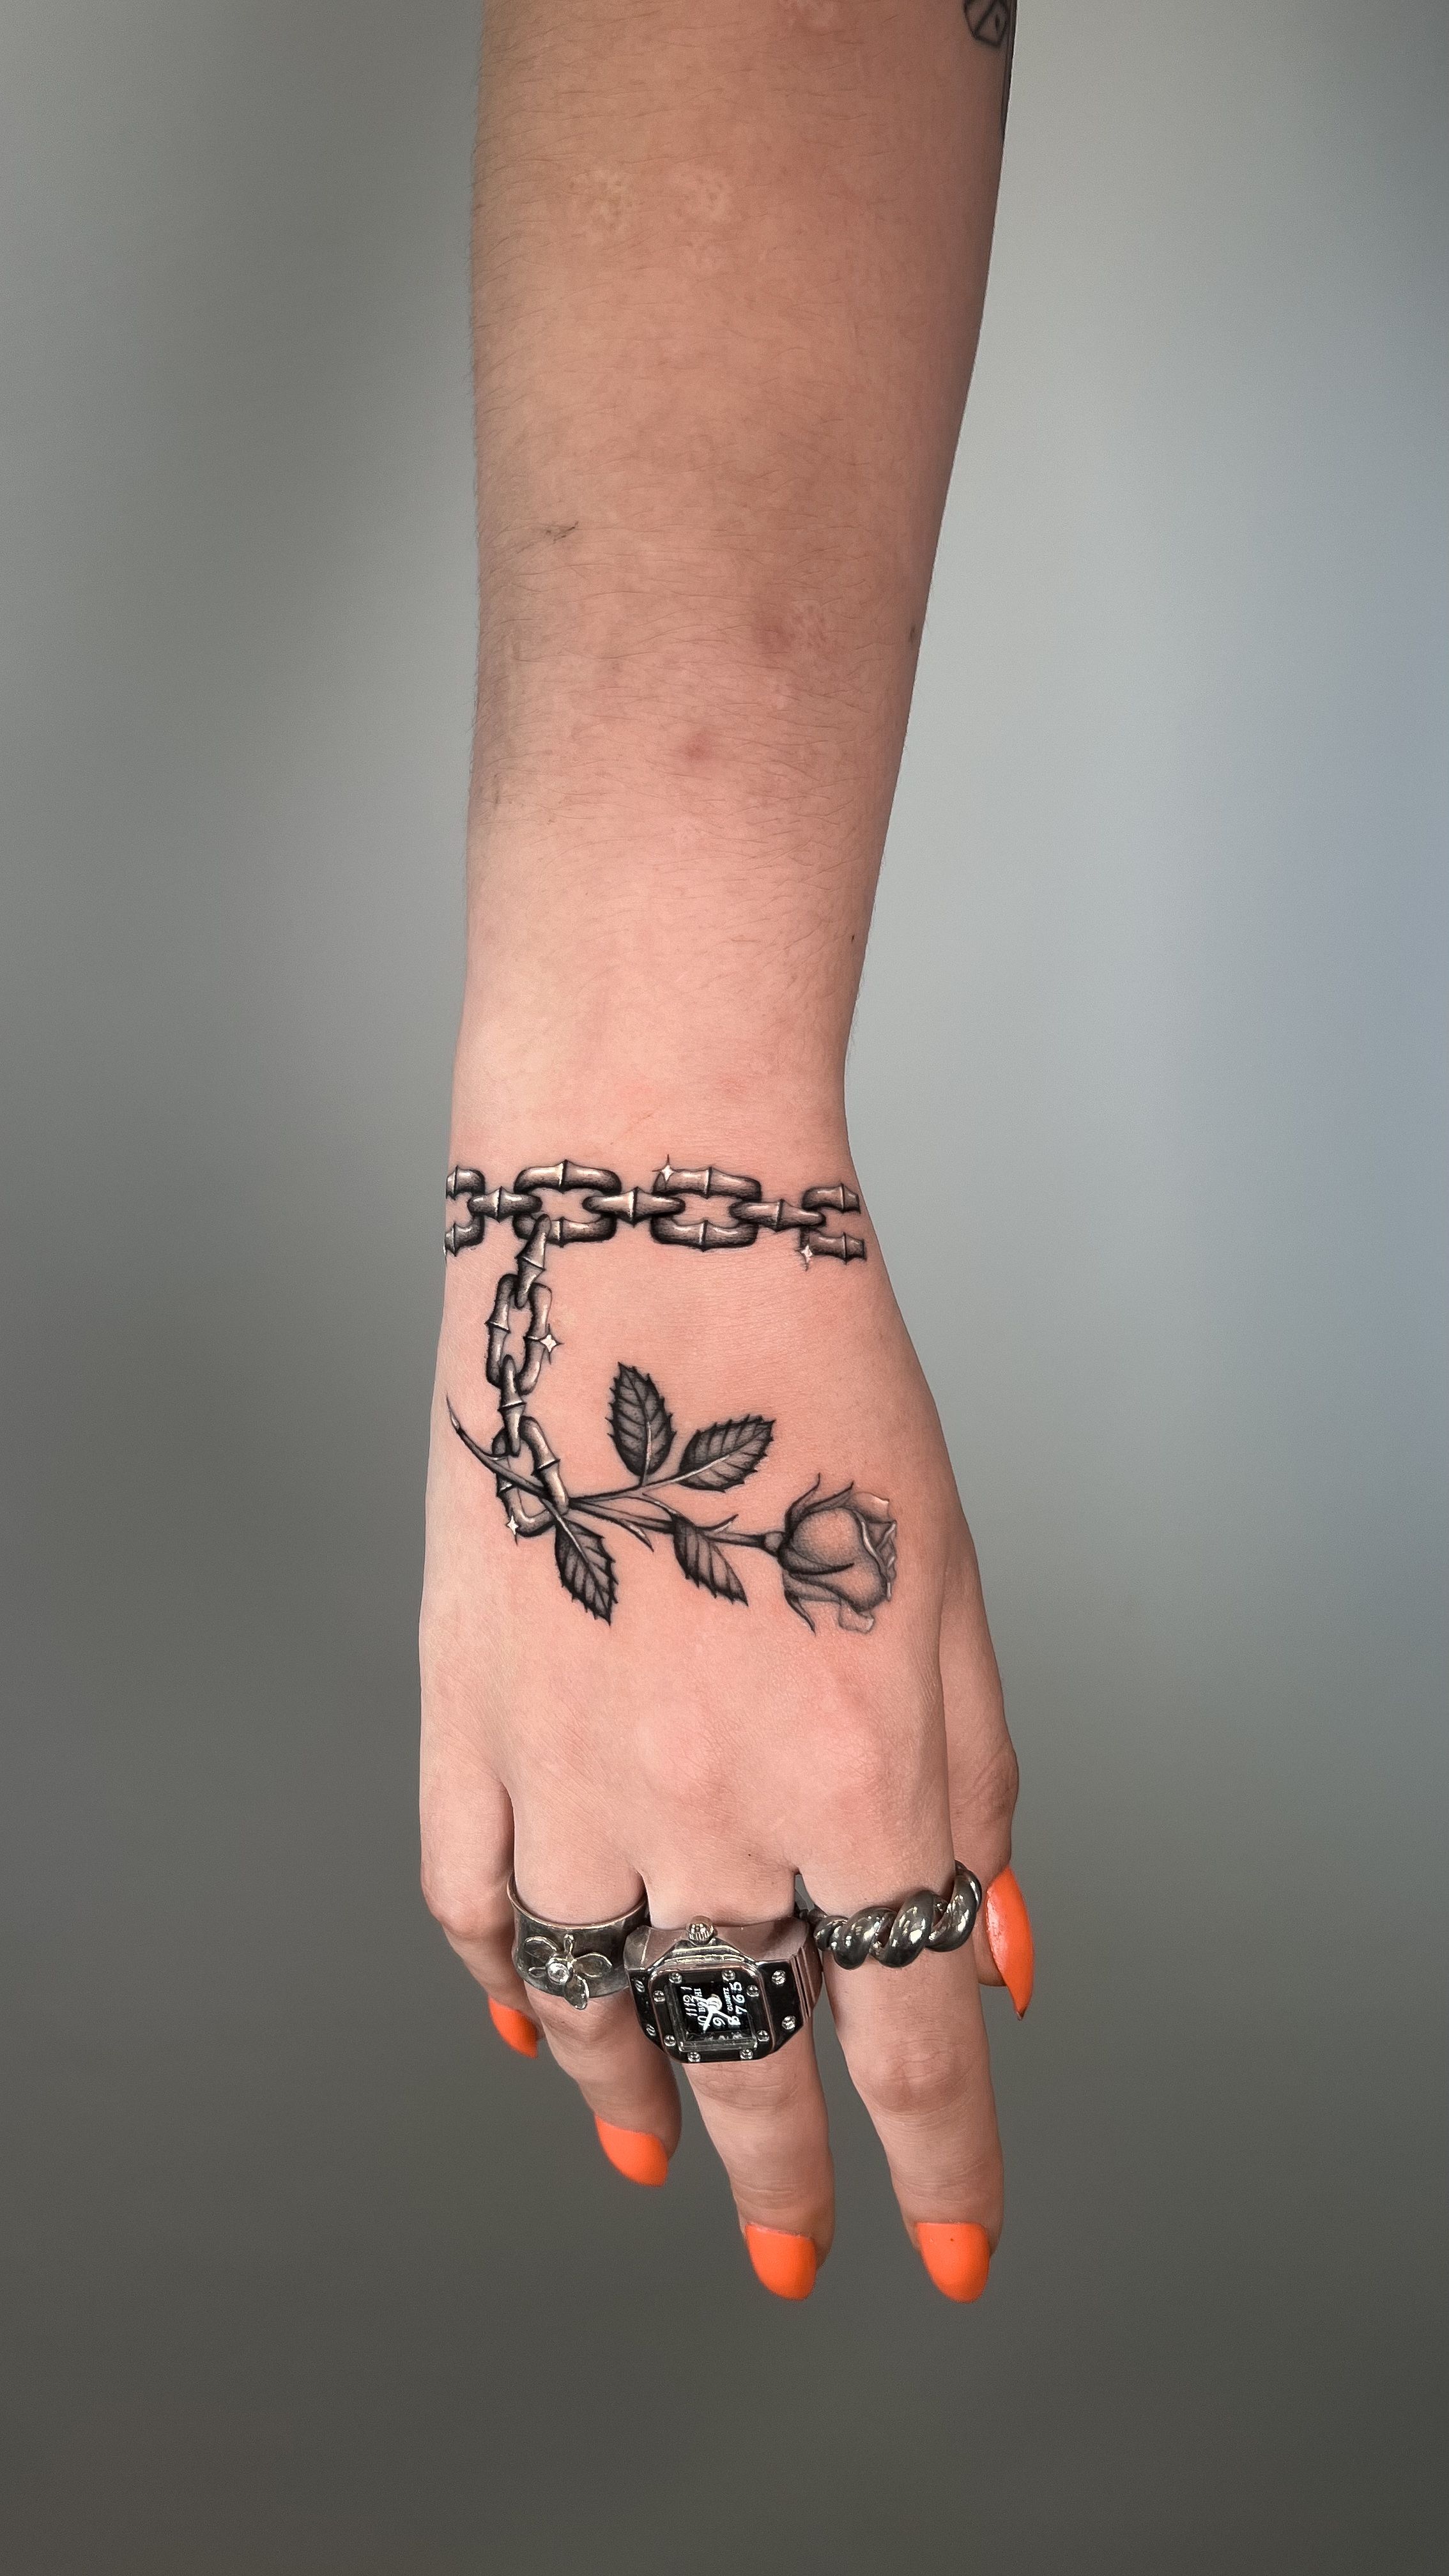 Veronica Lee Tattoo - Custom Design Lucky Charm Bracelet Feel so blessed  connecting with such amazing souls and making people happy ... Thank you  for your trust and friendship... keep in touch